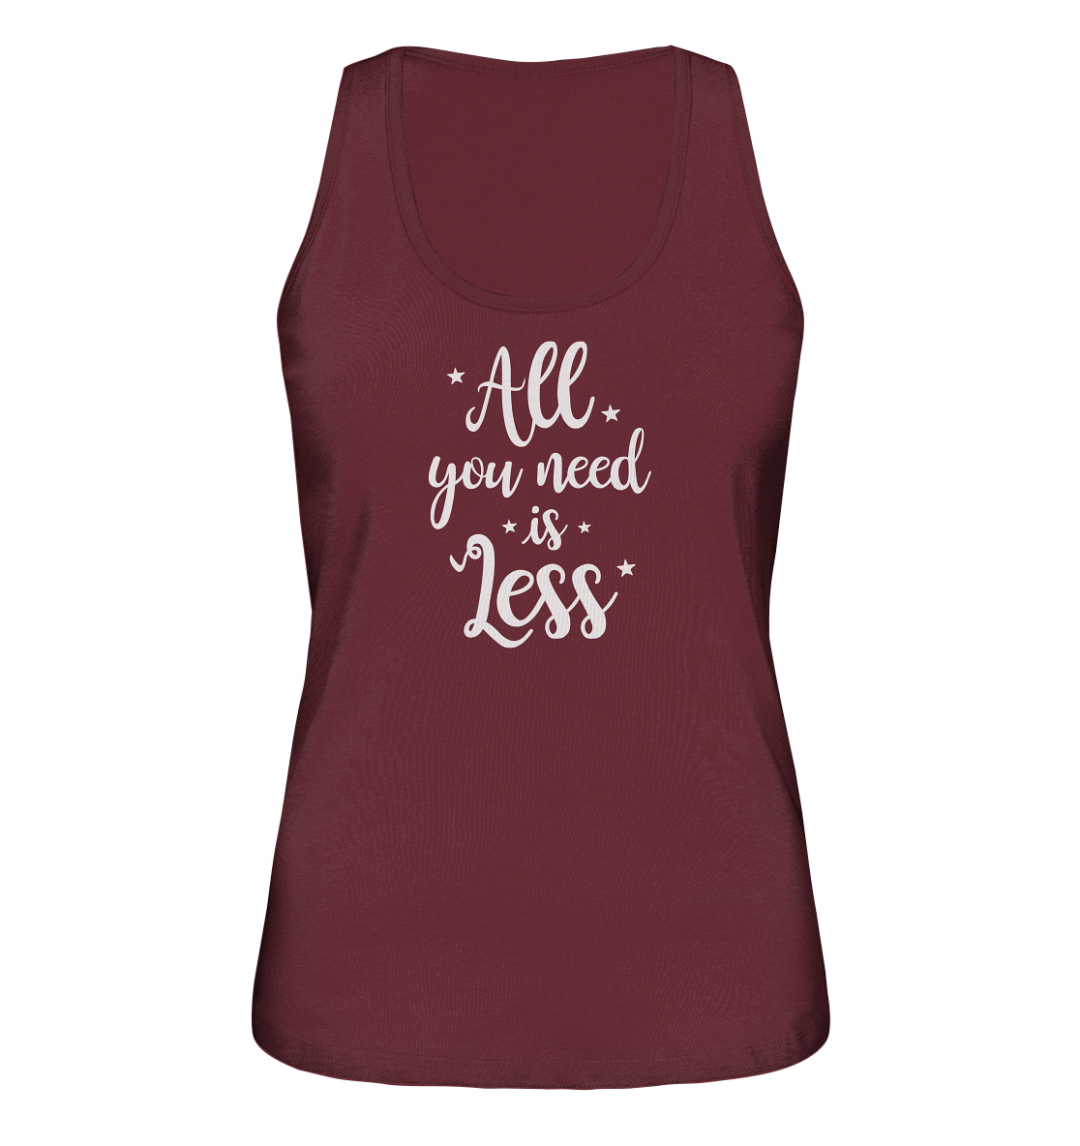 front ladies organic tank top 672b34 1116x 2 All You Need Is Less - Ladies Organic Tank-Top